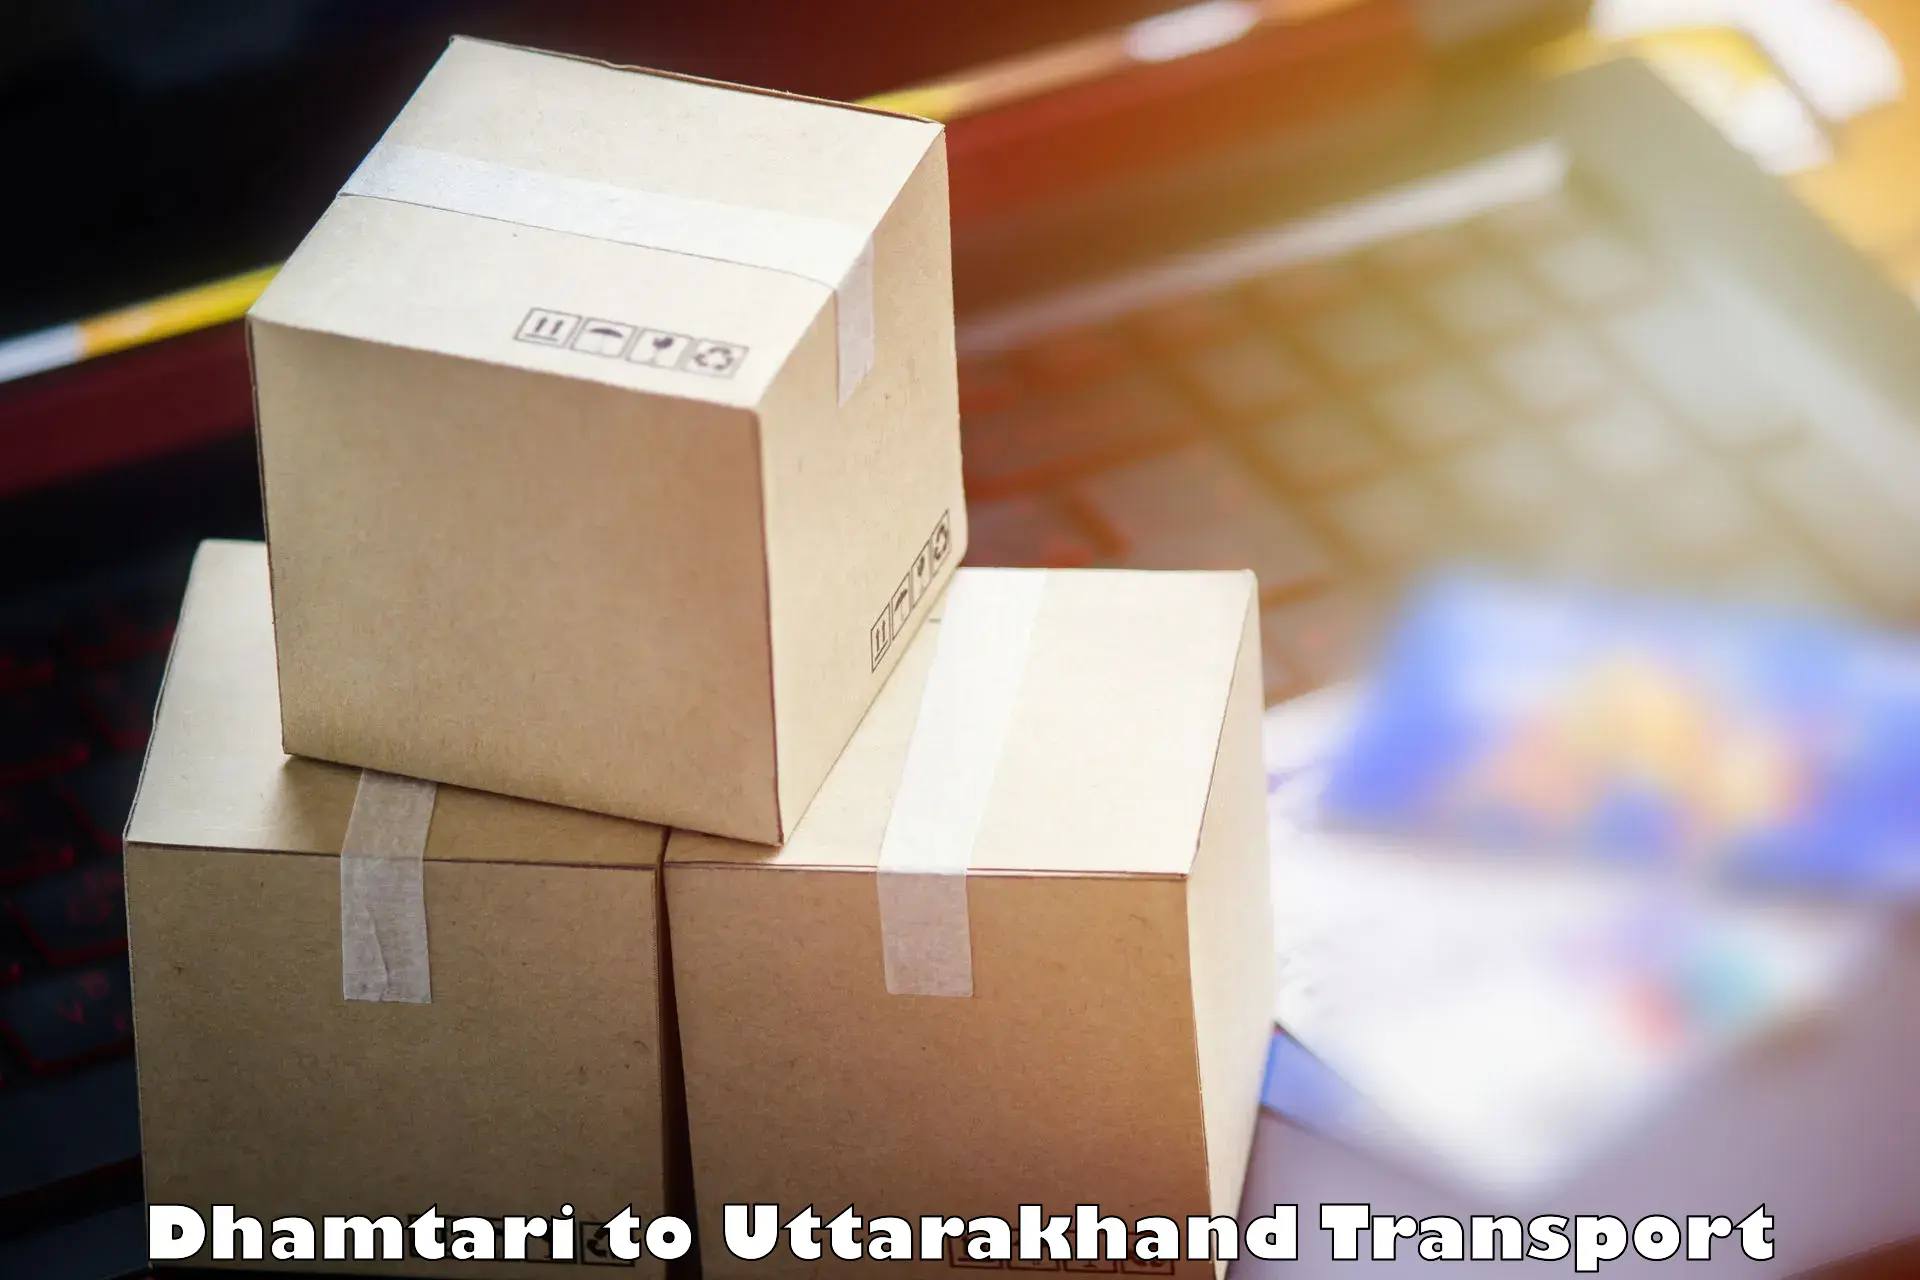 Container transport service Dhamtari to Kashipur